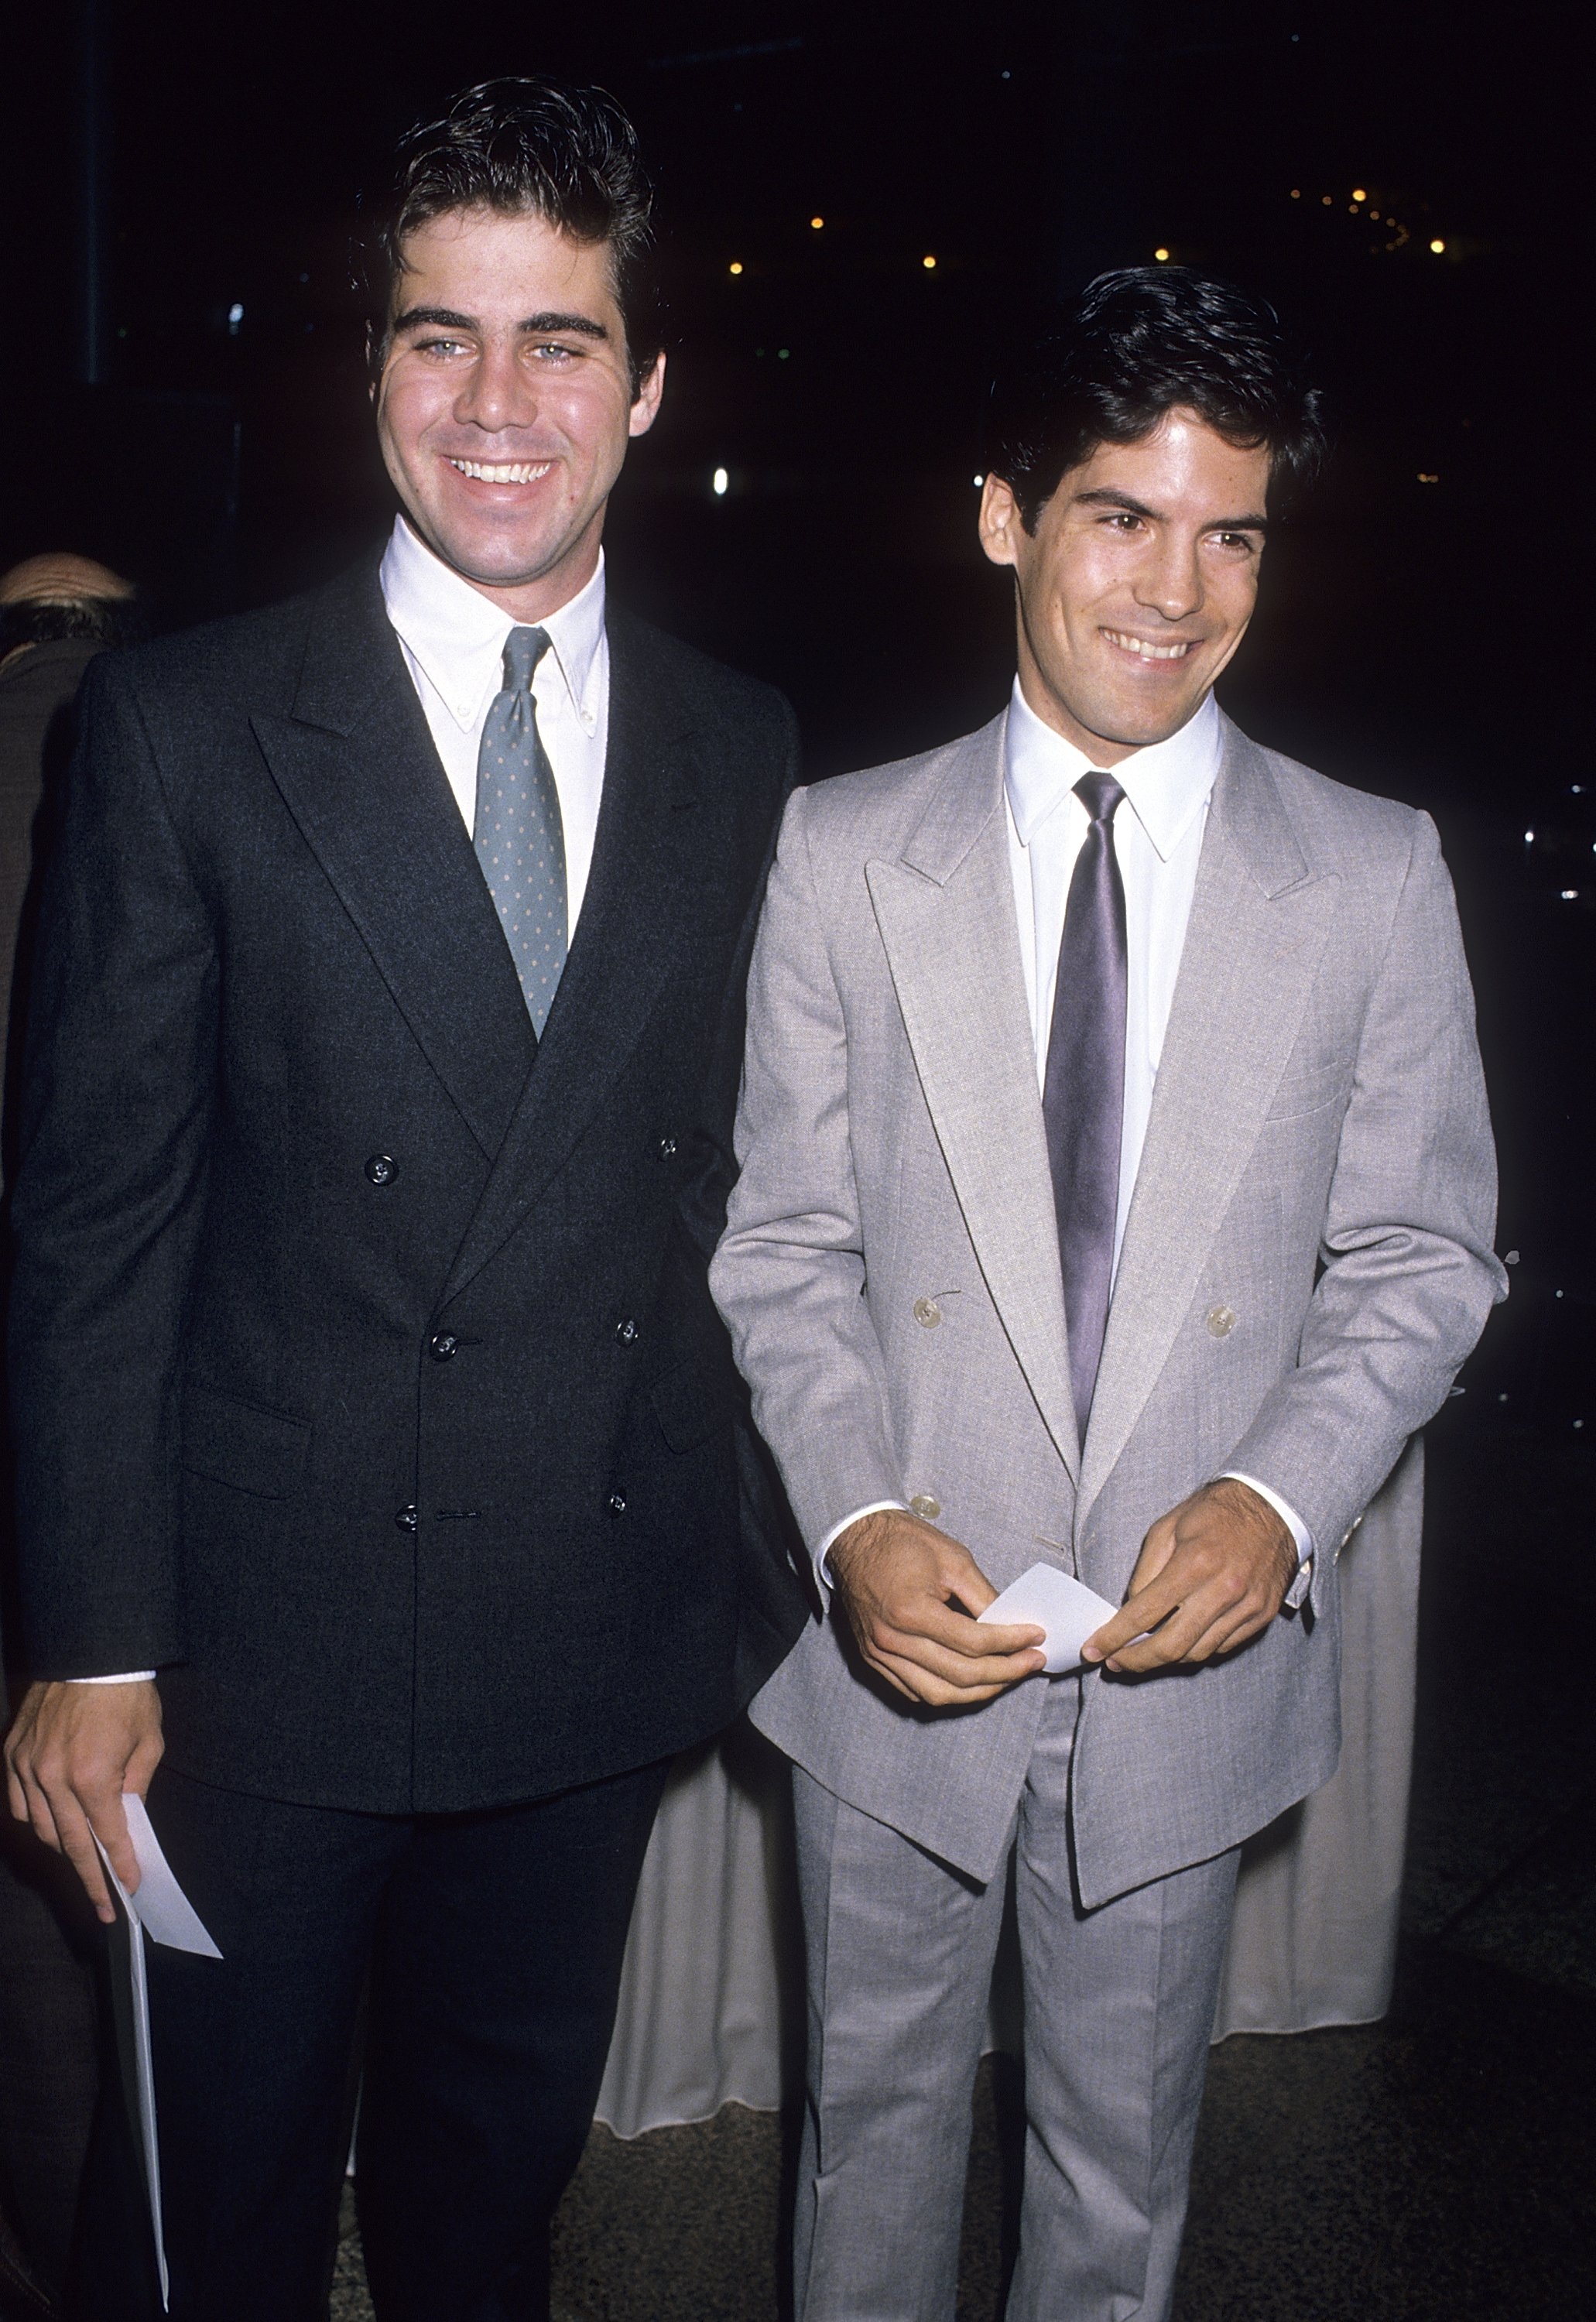 Matthew Labyorteaux with Patrick Labyorteaux at Filmland Center in Culver City, California on October 15, 1988. | Source: Getty Images